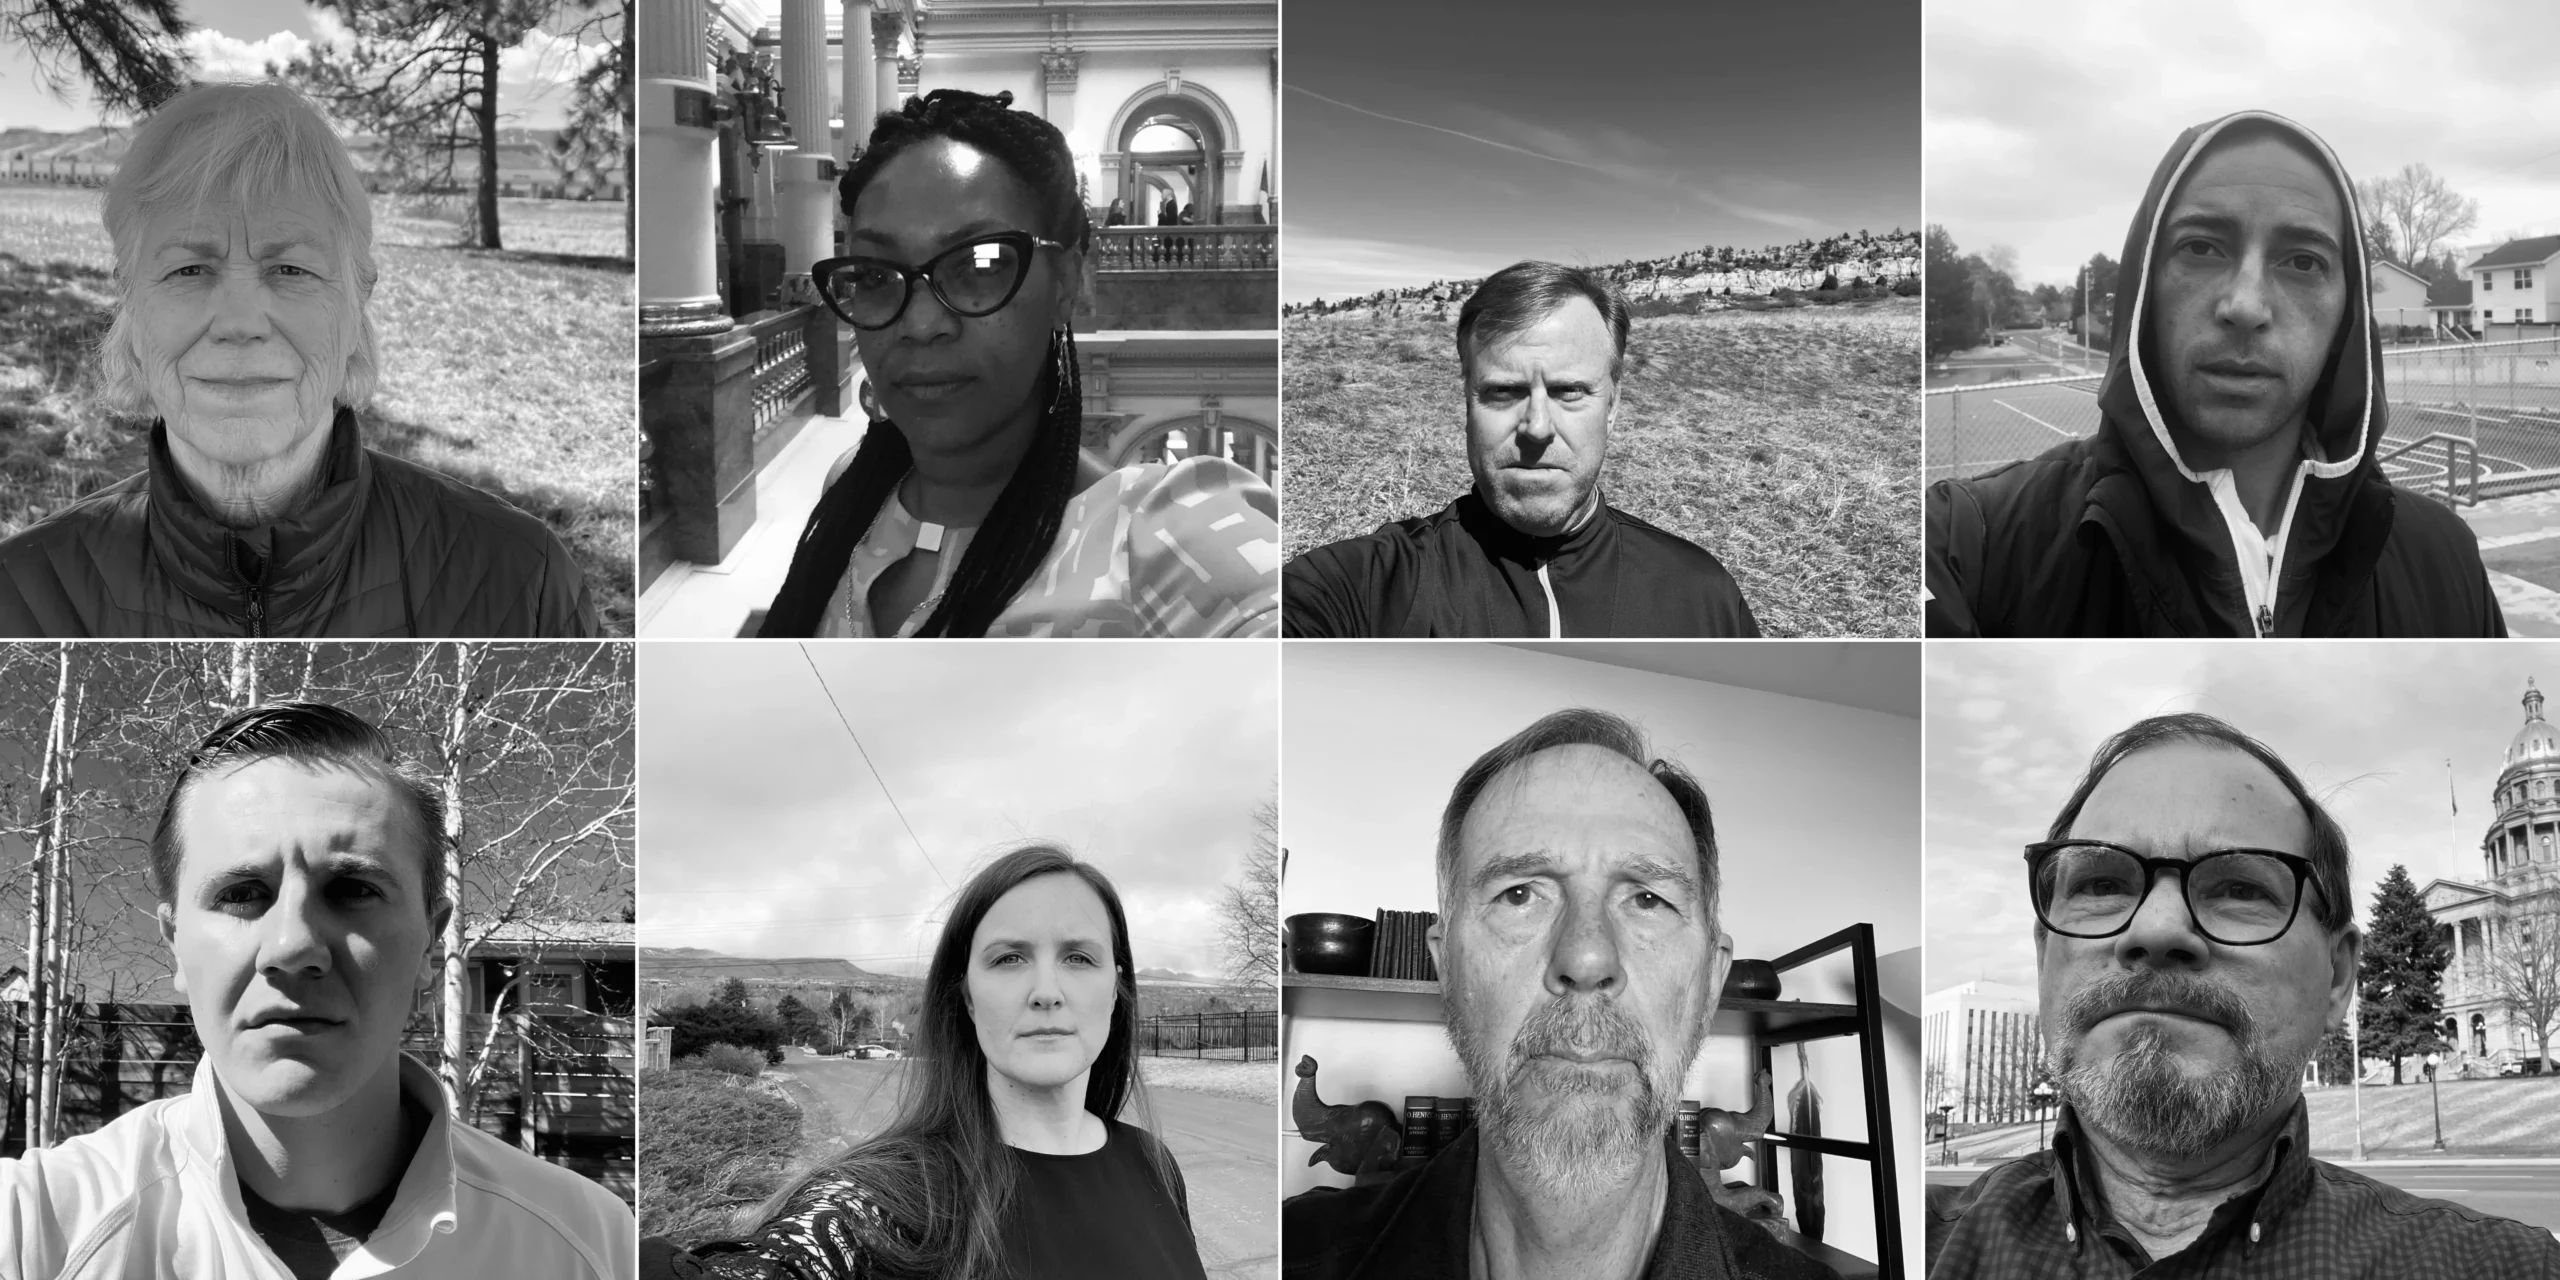 Somber, selfie-style pictures of real Colorado Ceasefire supporters.